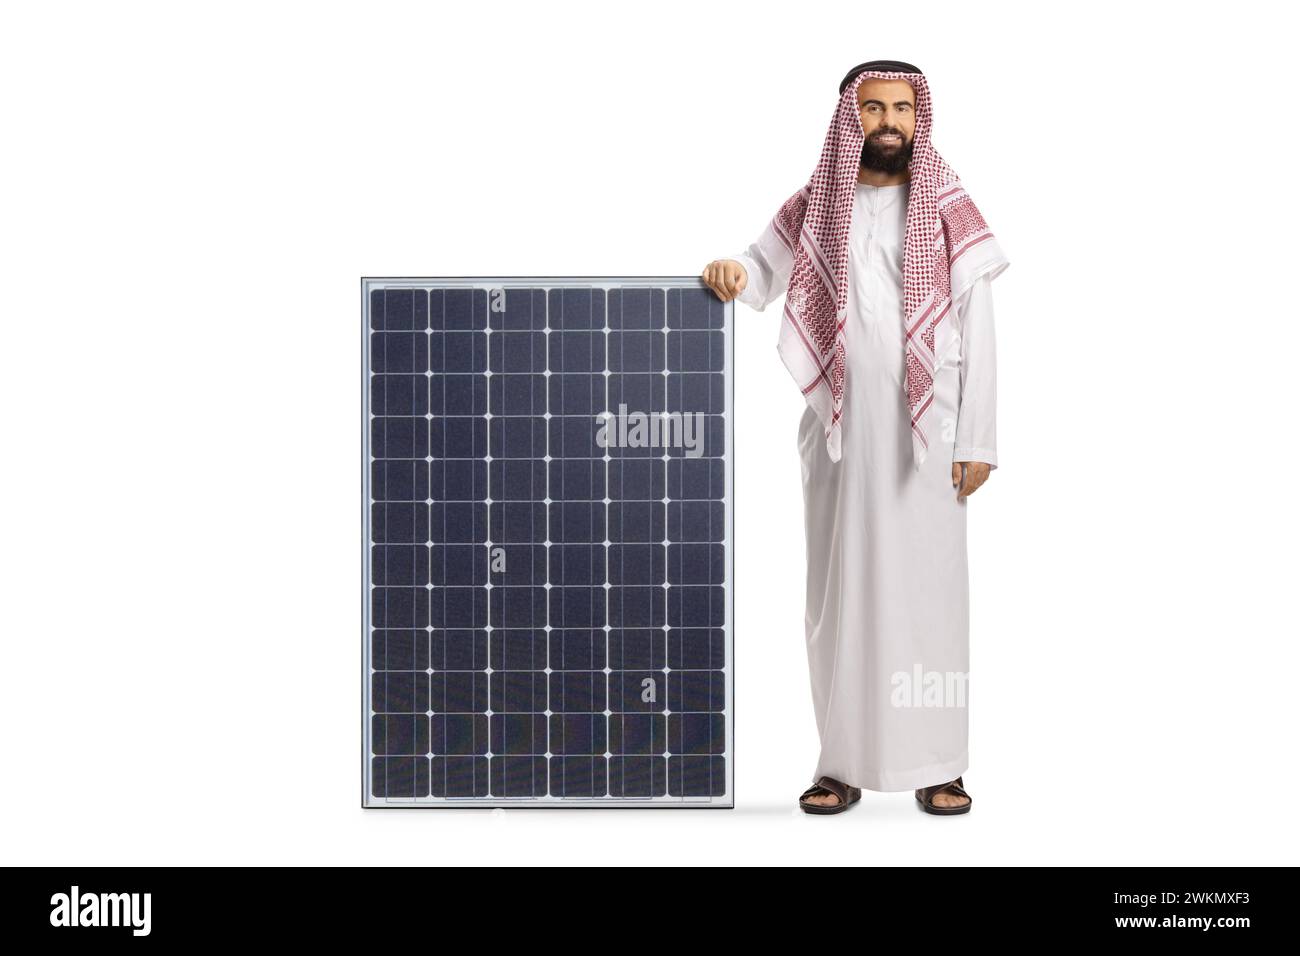 Saudi arab man with a solar panel isolated on white background Stock Photo